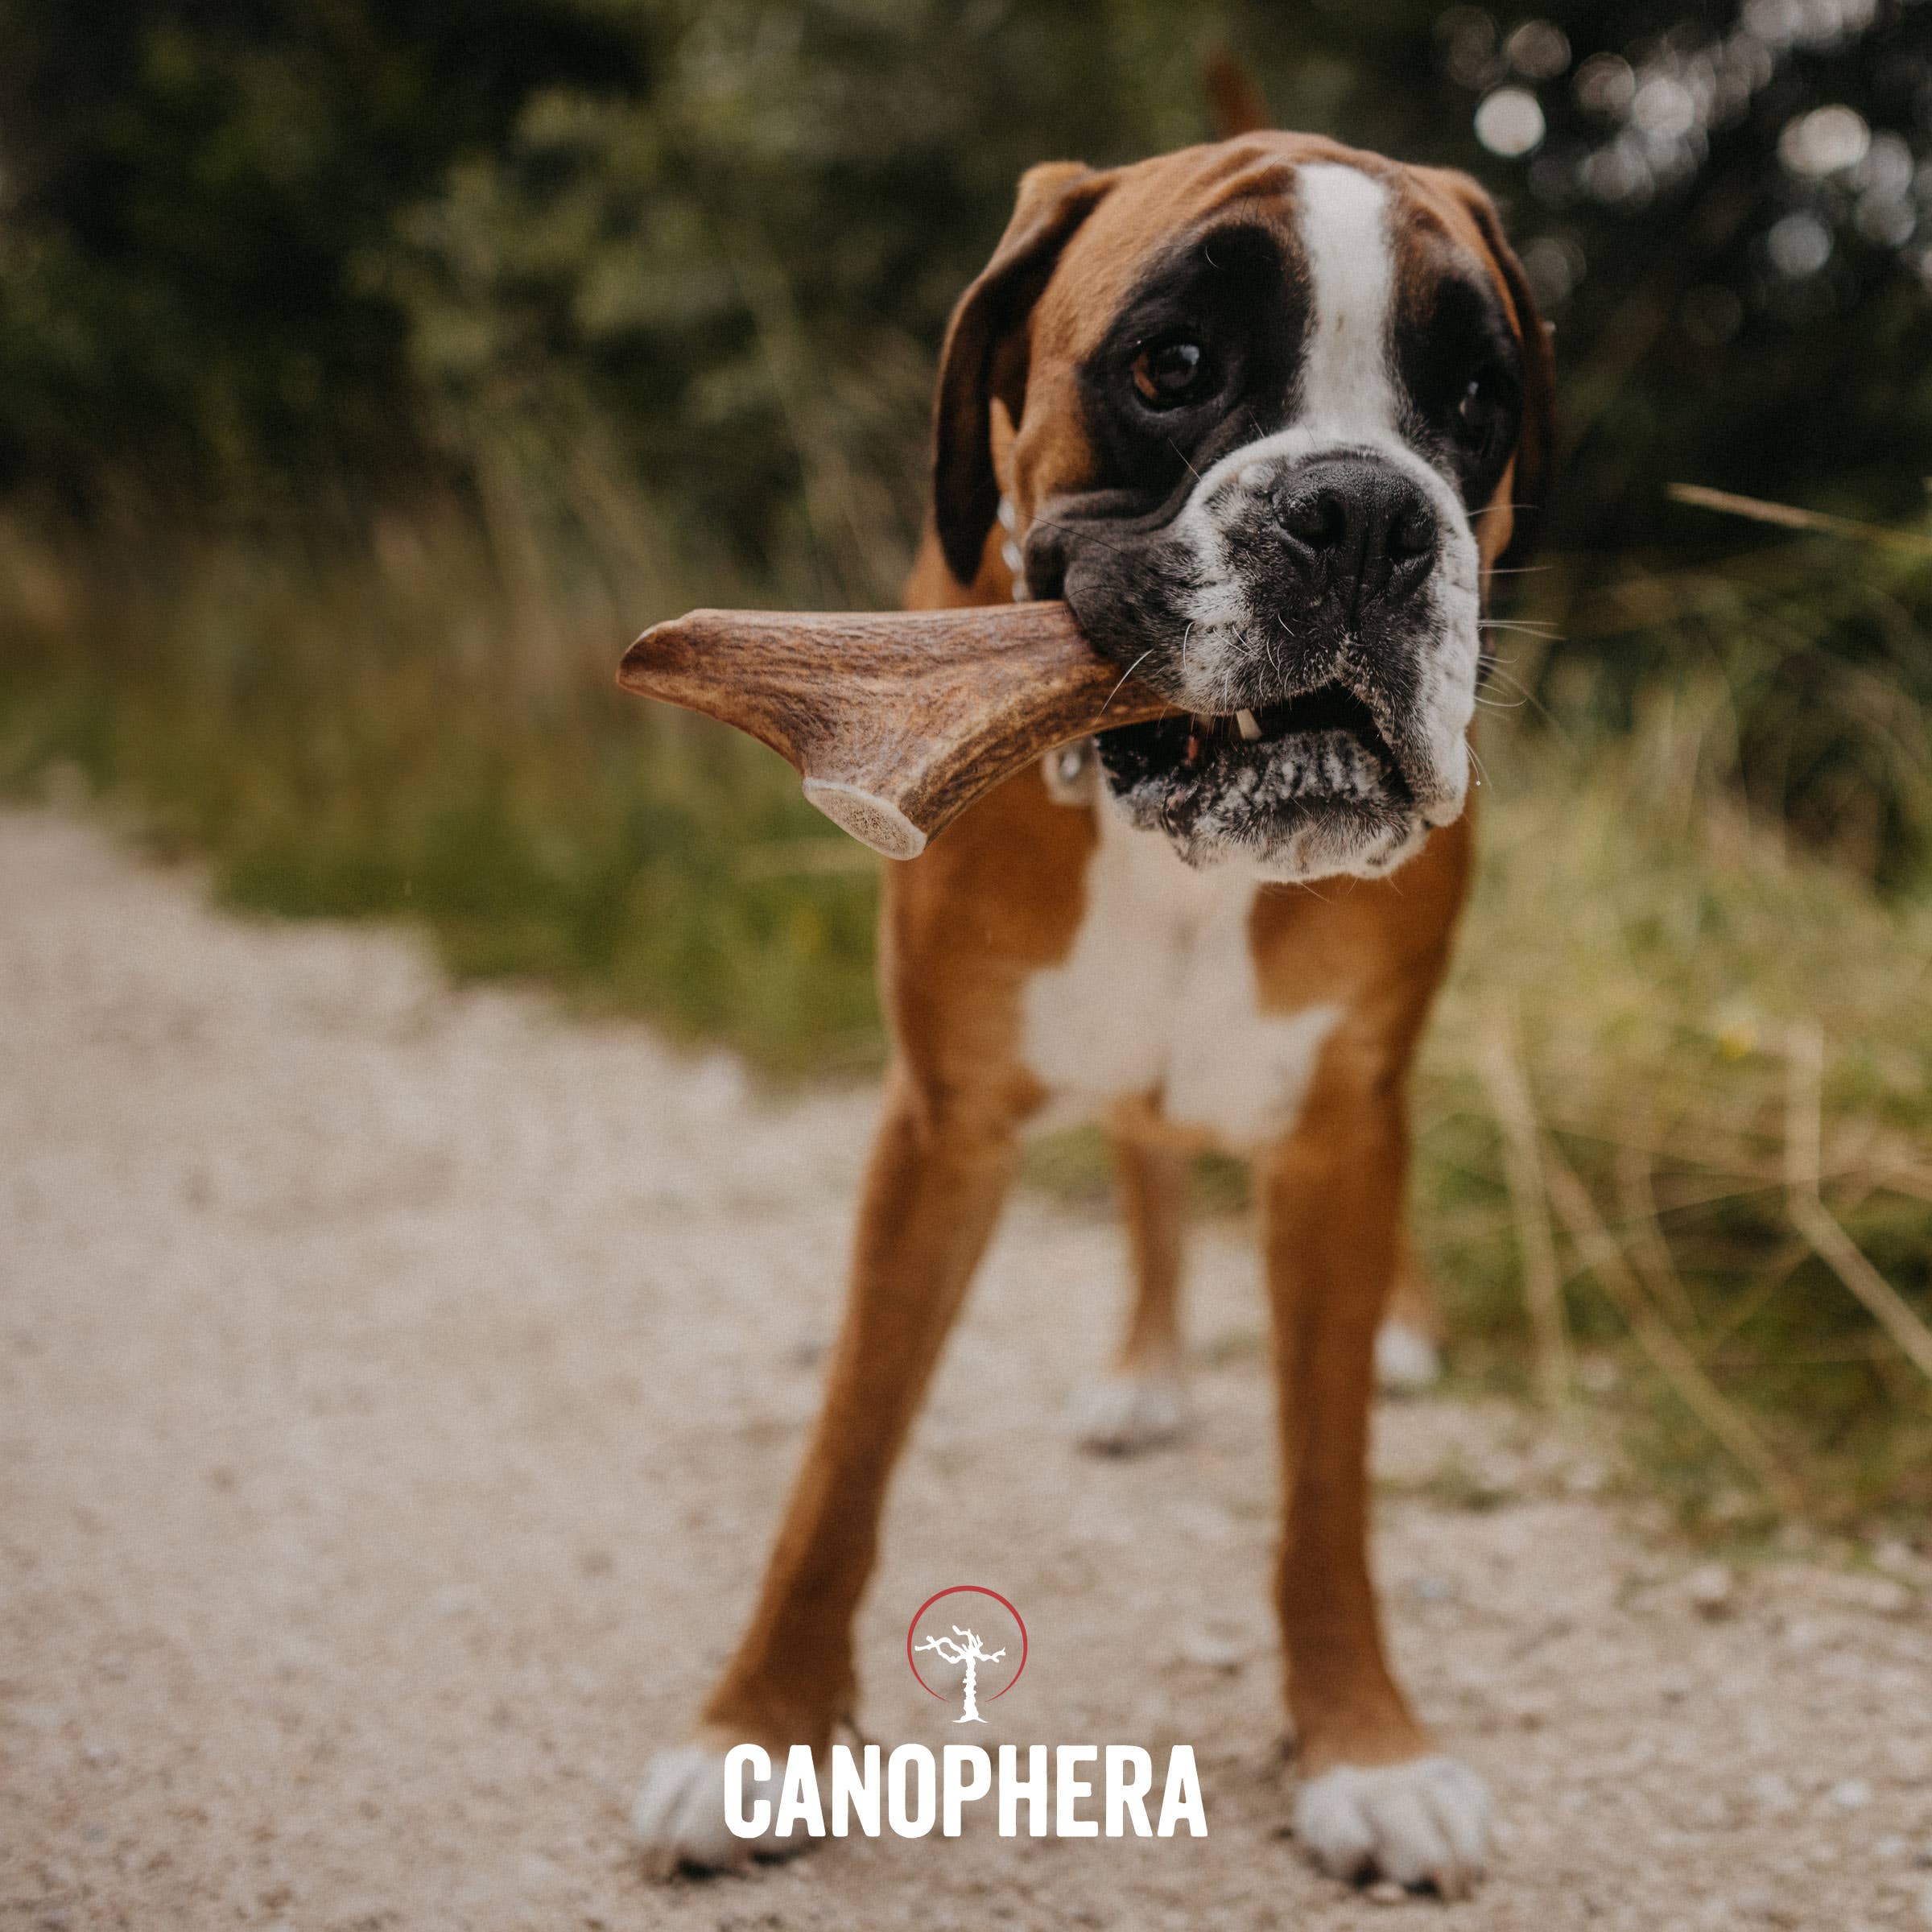 CANOPHERA LLC - Dog Chew Made of Red Deer Antlers